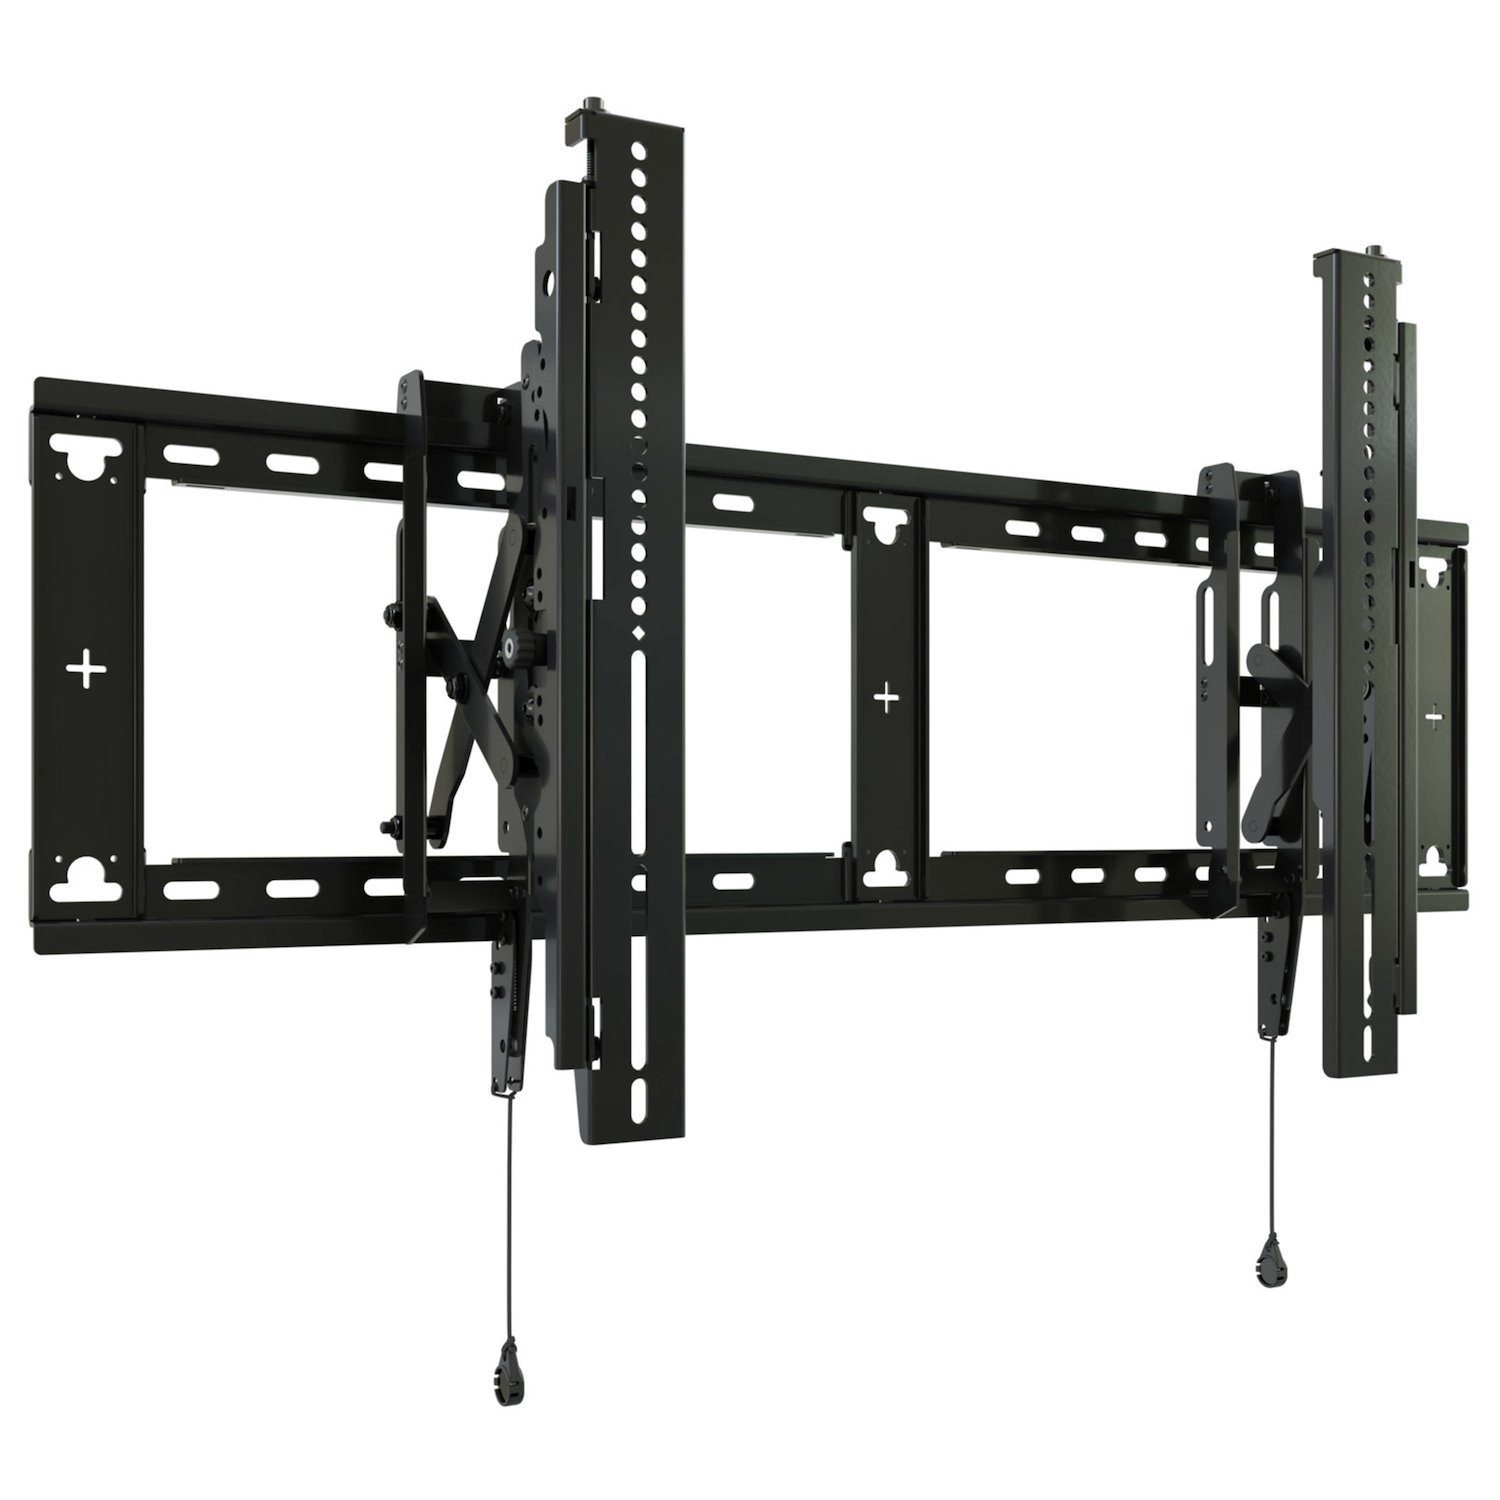 Chief RLXT3 TV Mount 2.16 M [85] Black (RLXT3 - Large Fit Extended Tilt Display Wall Mount)